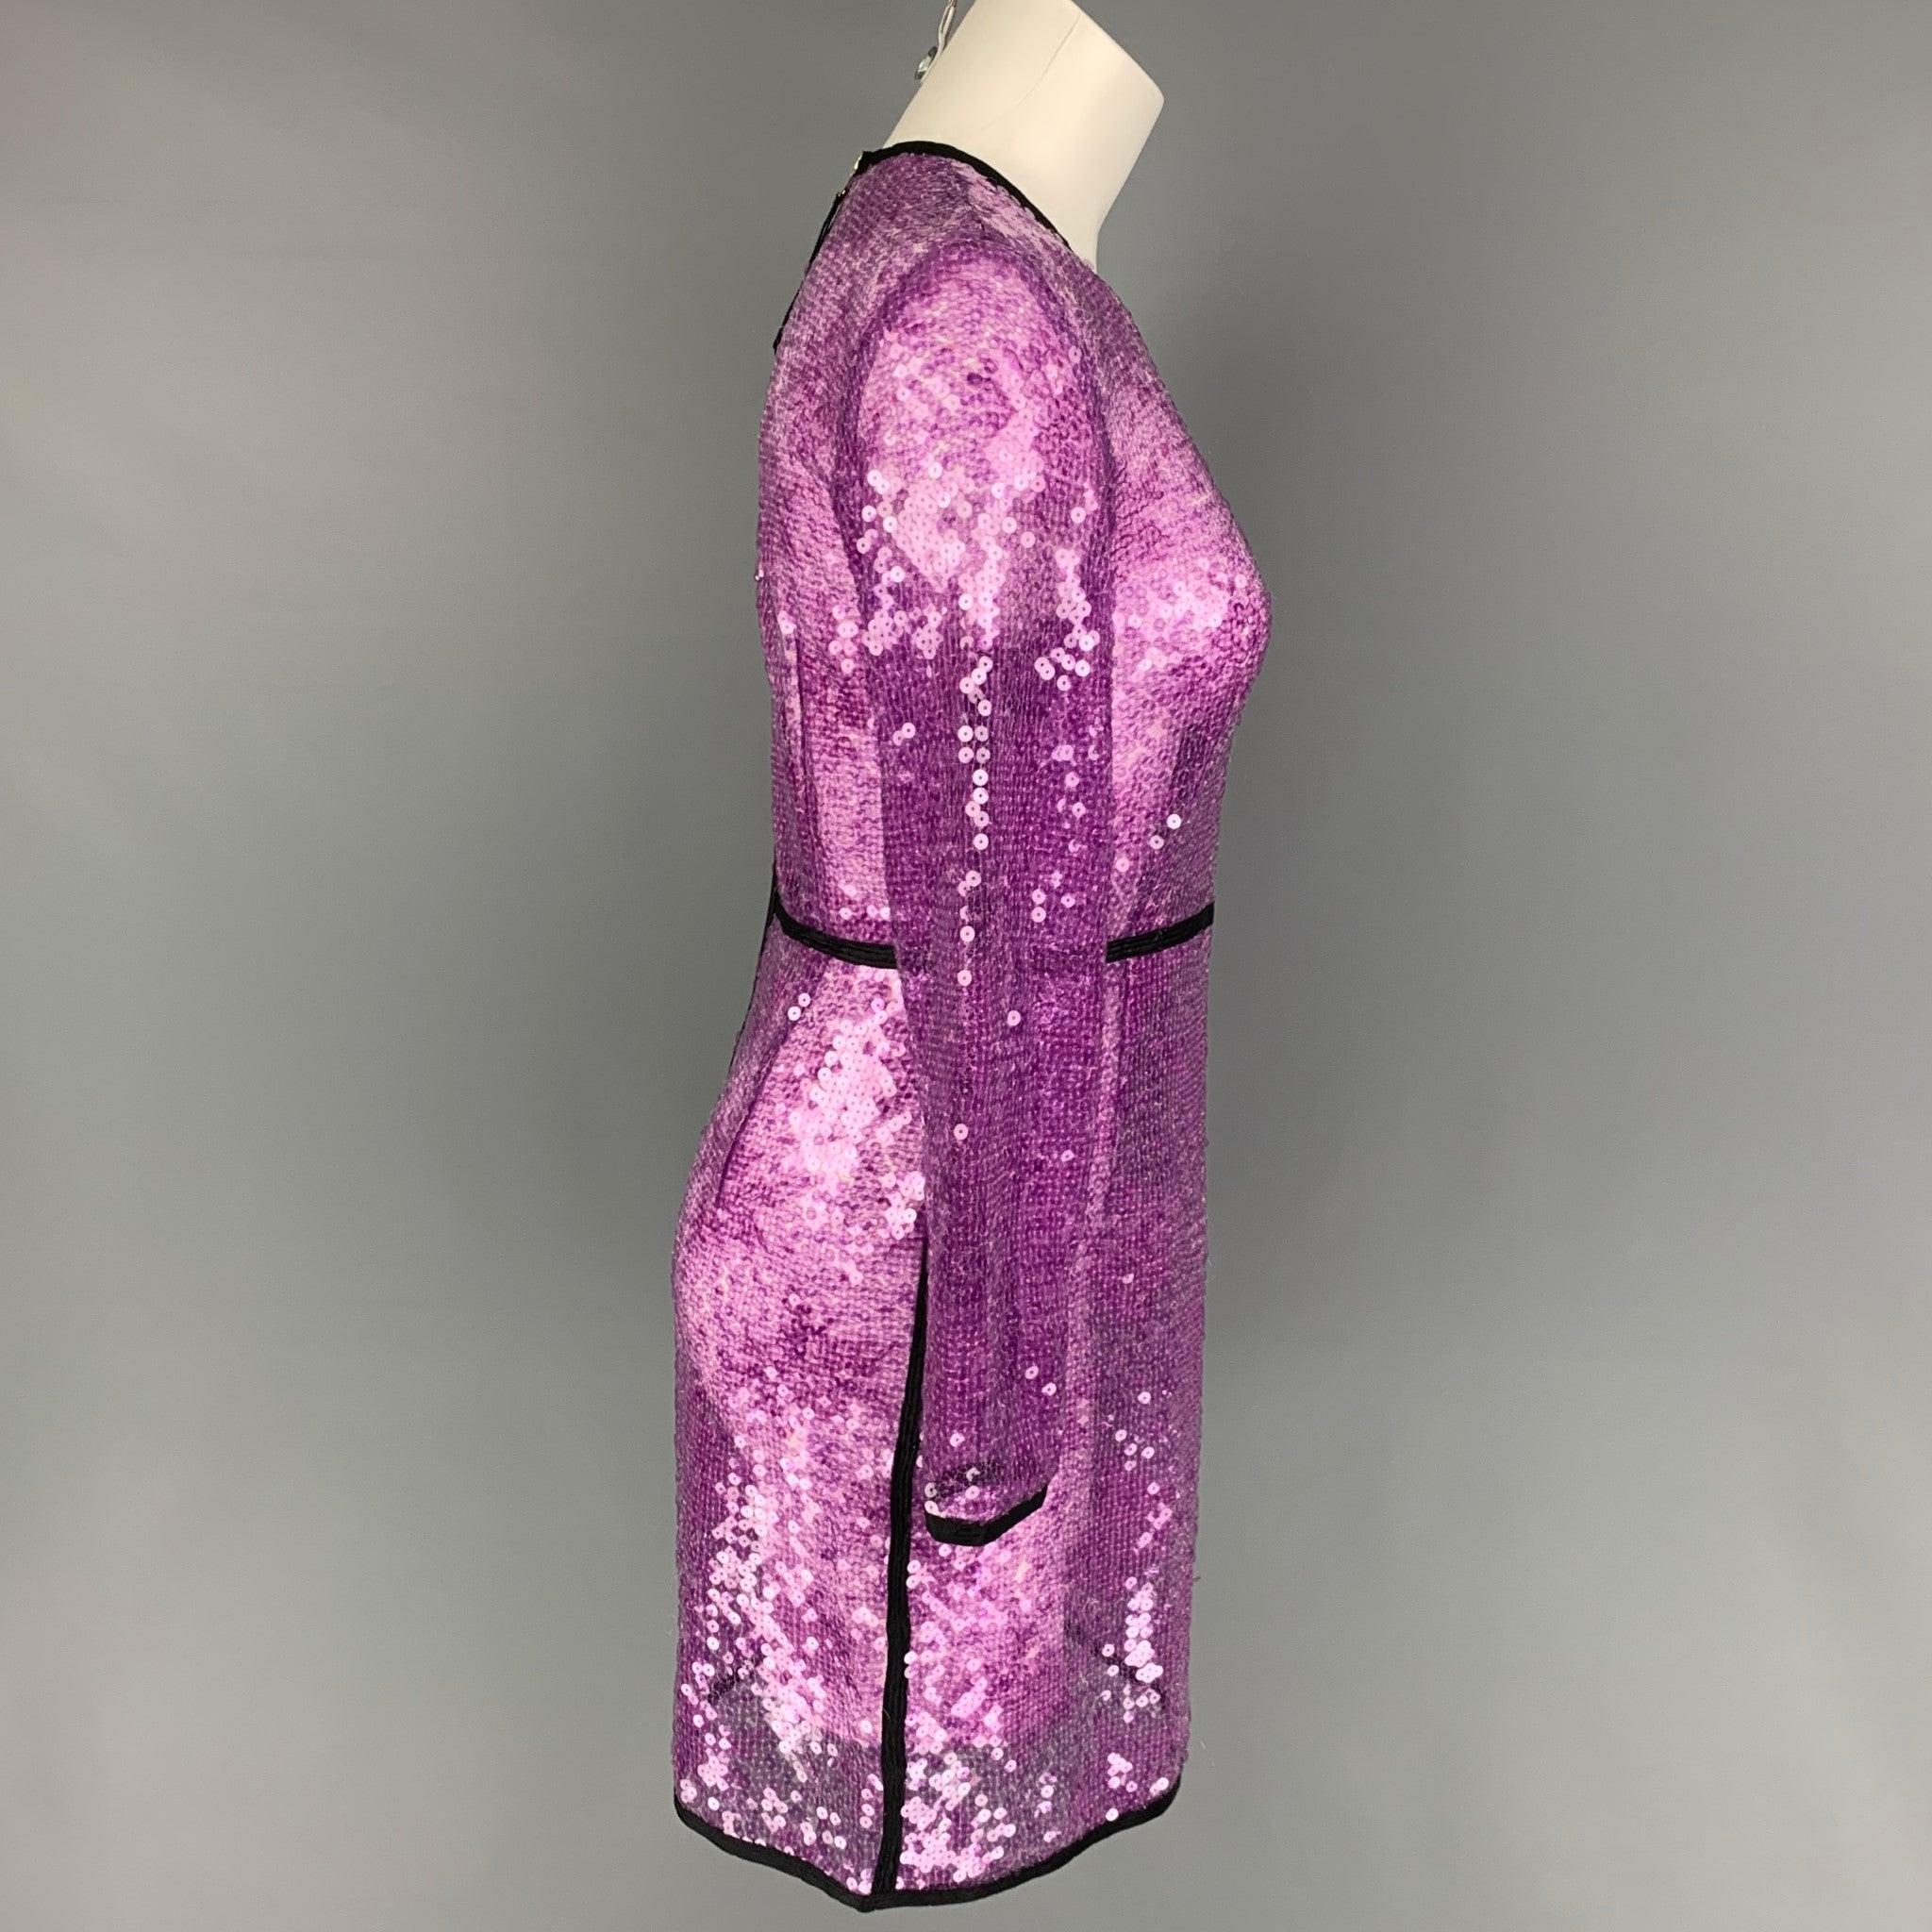 MARC JACOBS dress comes in a purple sequin material with a black trim featuring a shift style, long sleeves, and a back zip up closure.
Very Good
Pre-Owned Condition. 

Marked:   4 

Measurements: 
 
Shoulder: 16 inches  Bust: 32 inches  Waist: 27